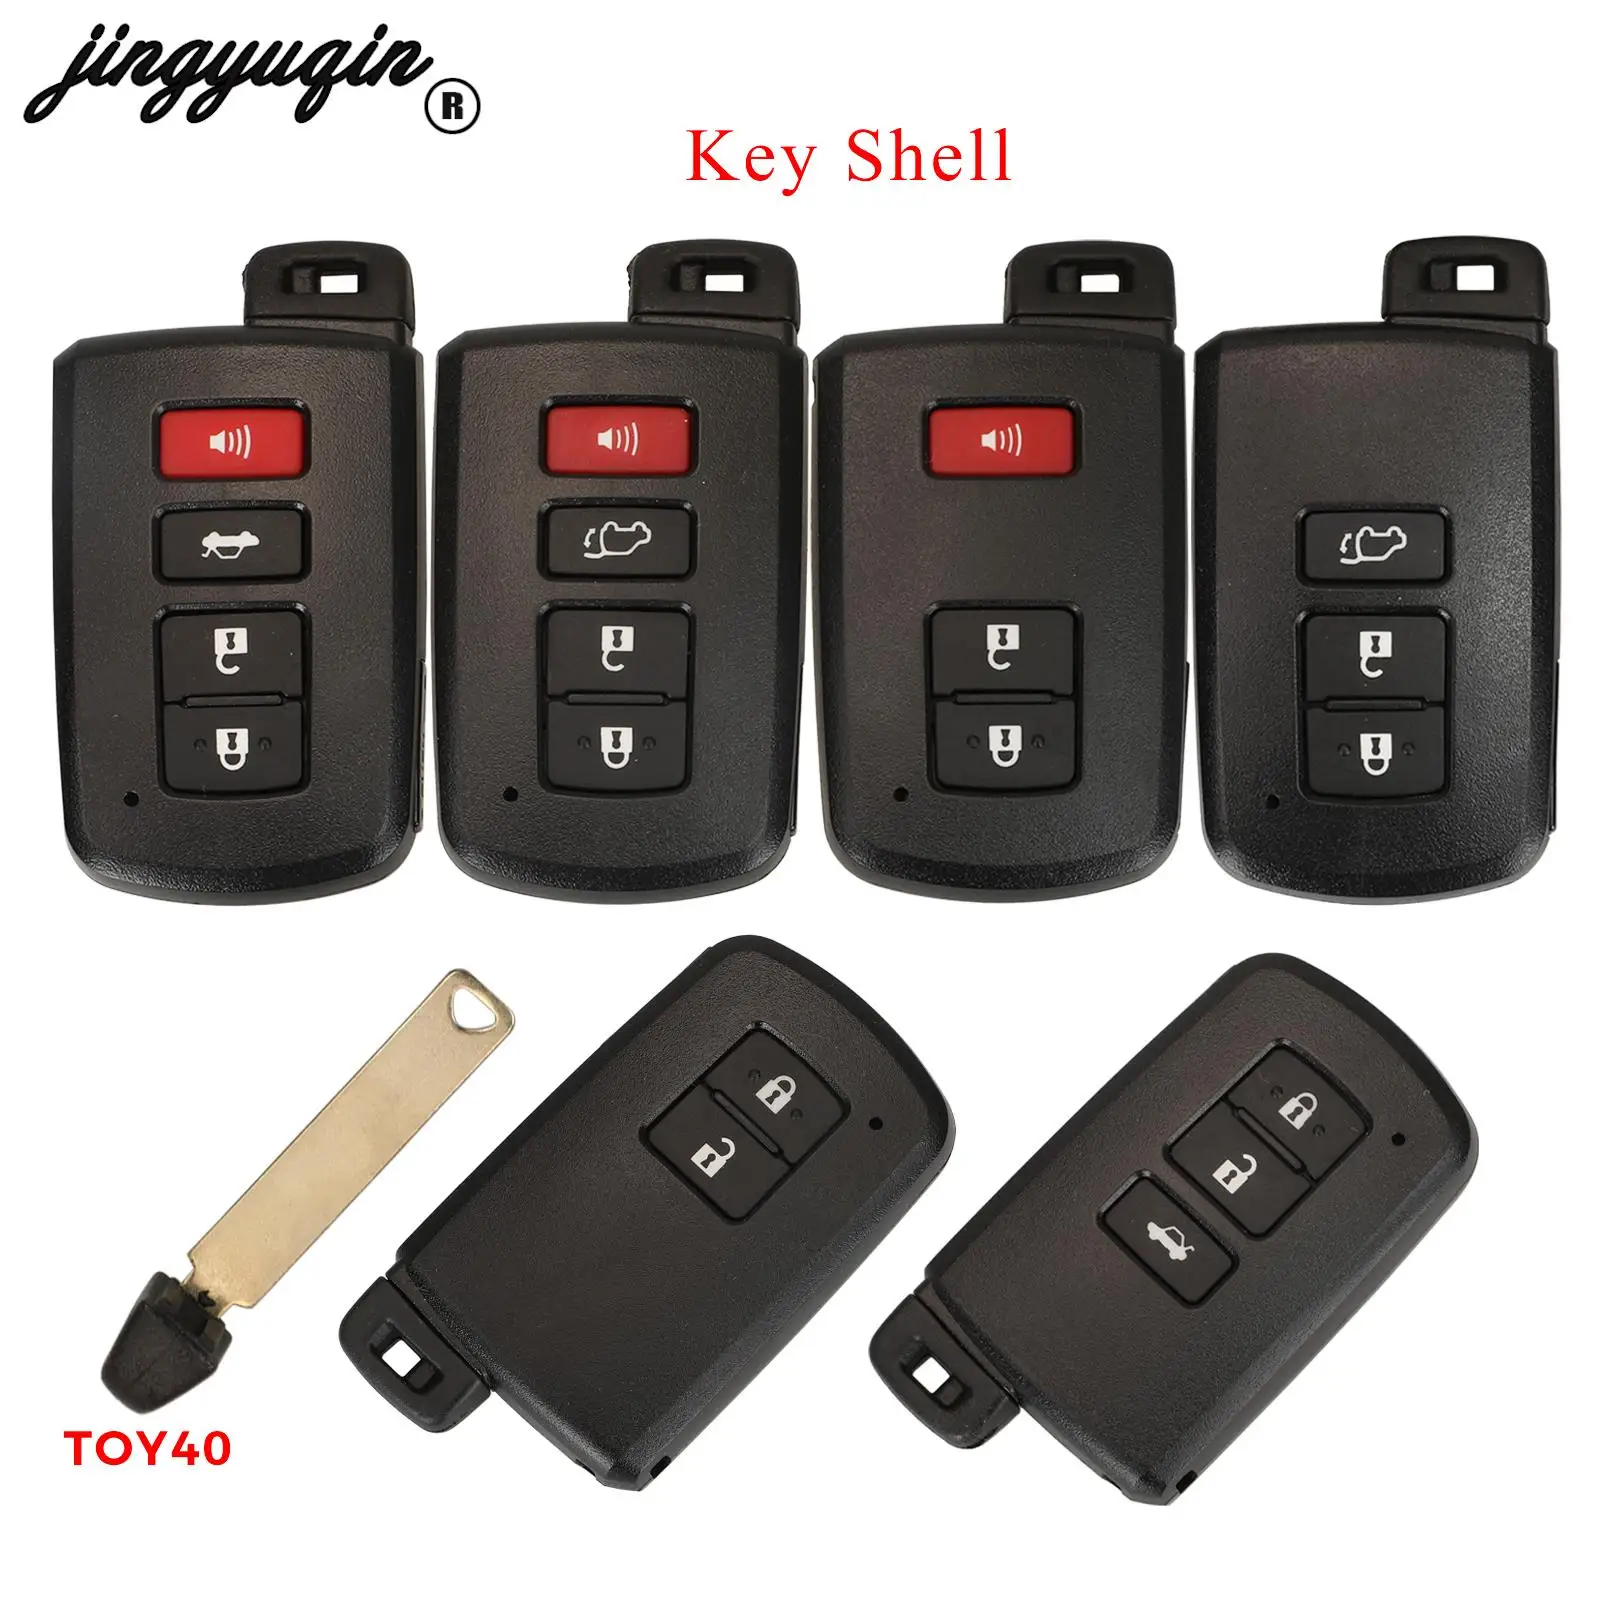 

jingyuqin 2/3/4 Buttons Remote Car Key Case Shell For Toyota Avalon Camry RAV4 Uncut Toy40 Blade Fob Replacement